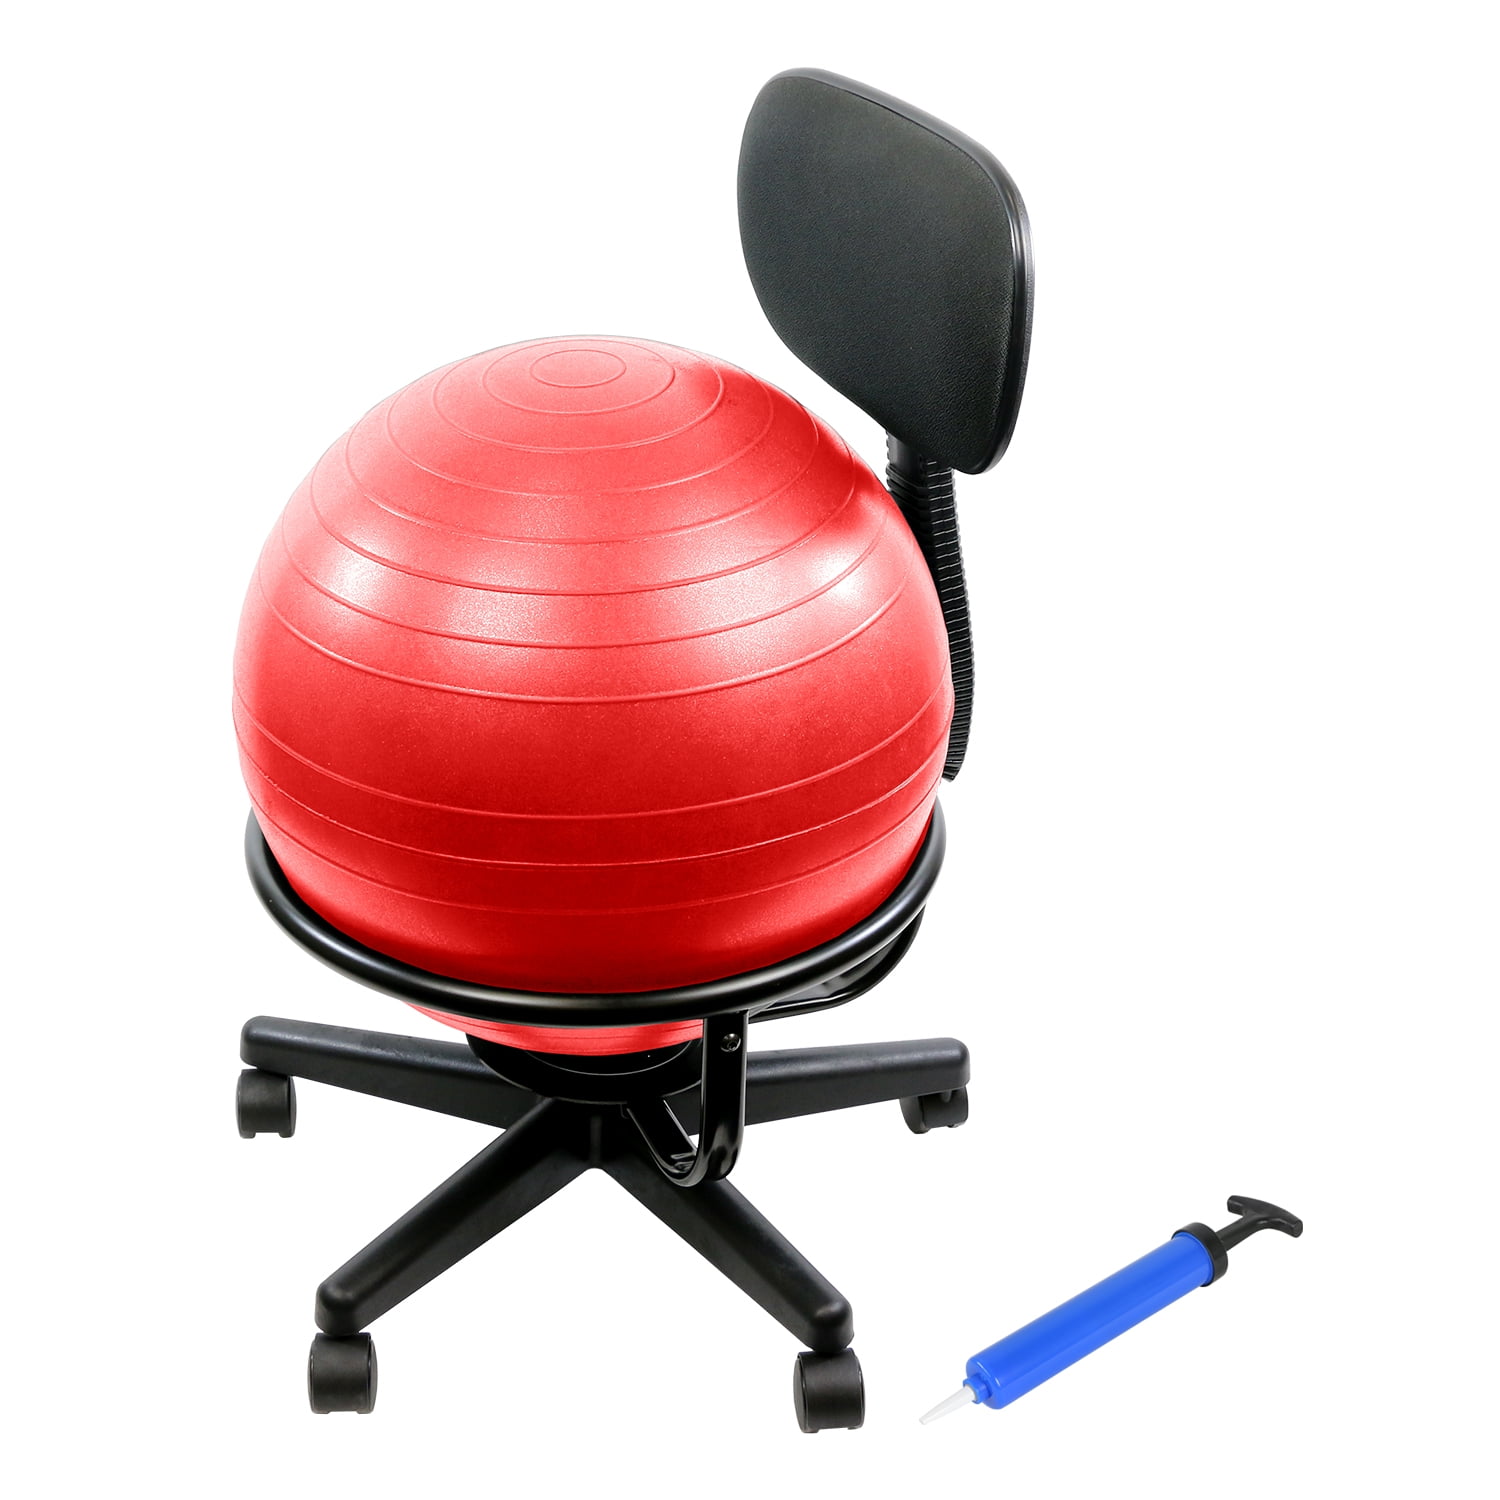 Cando Metal Ball Chair Inflatable Ergonomic Active Seating Exercise Ball Chair With Air Pump For